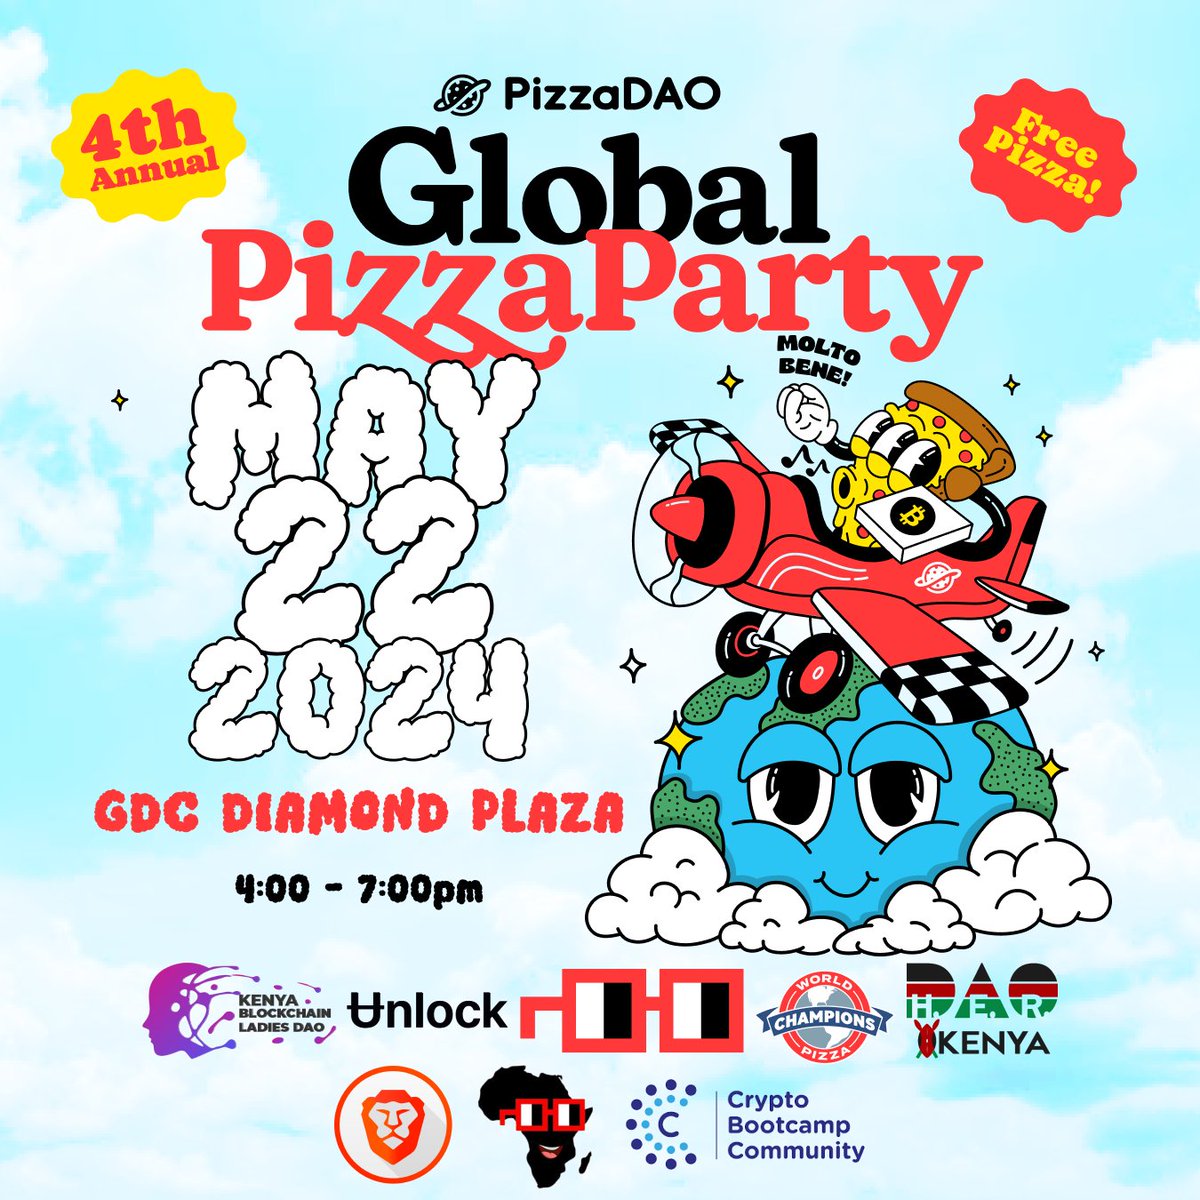 Gm folks! This message will self-destruct in 10 seconds... unless you RSVP to the most delicious event of the year - a PIZZA PARTY hosted by @Pizza_DAO   Let's get this party started!
RSVP here; app.unlock-protocol.com/event/nairobi-…